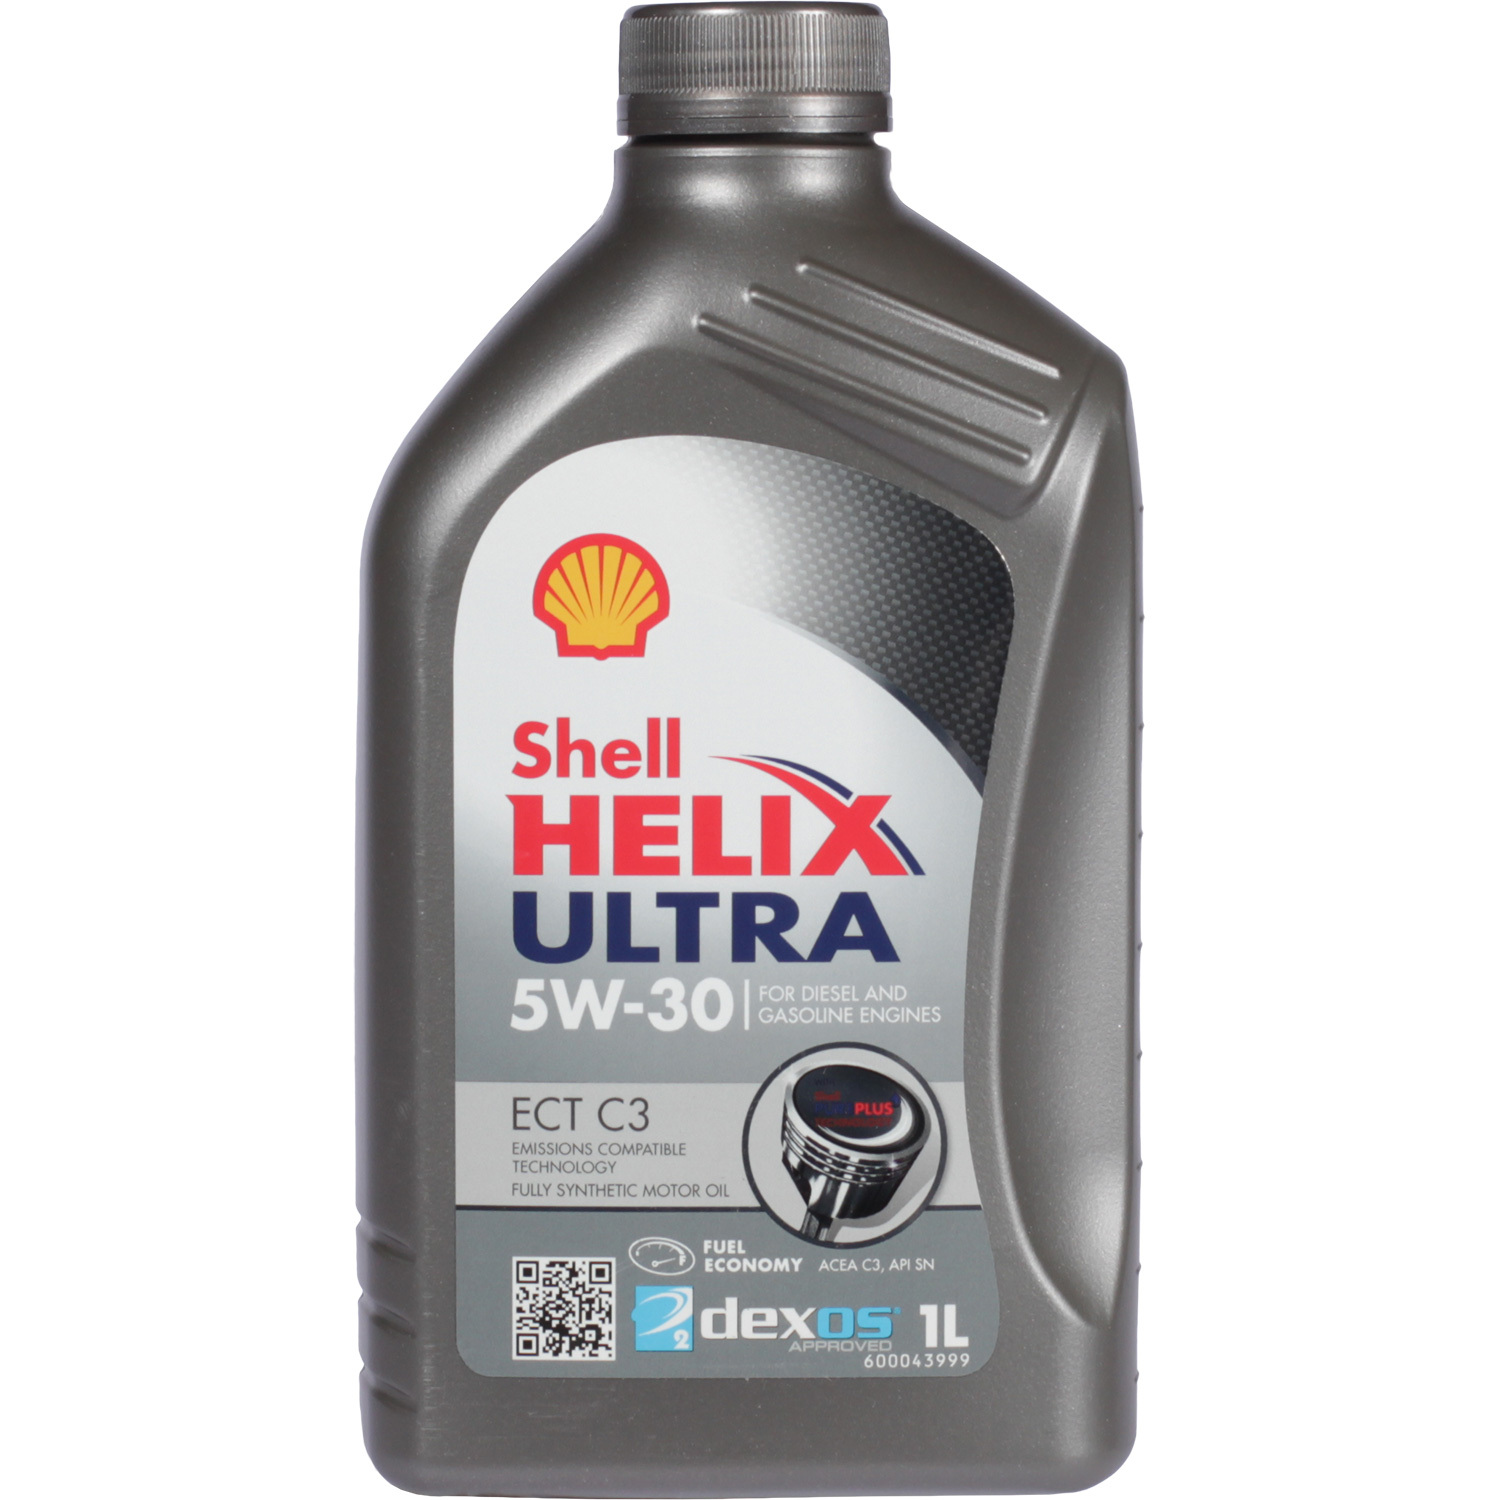 Shell Моторное масло Shell Helix Ultra ECT С3 5W-30, 1 л масло моторное shell helix ultra 5w 40 1 л